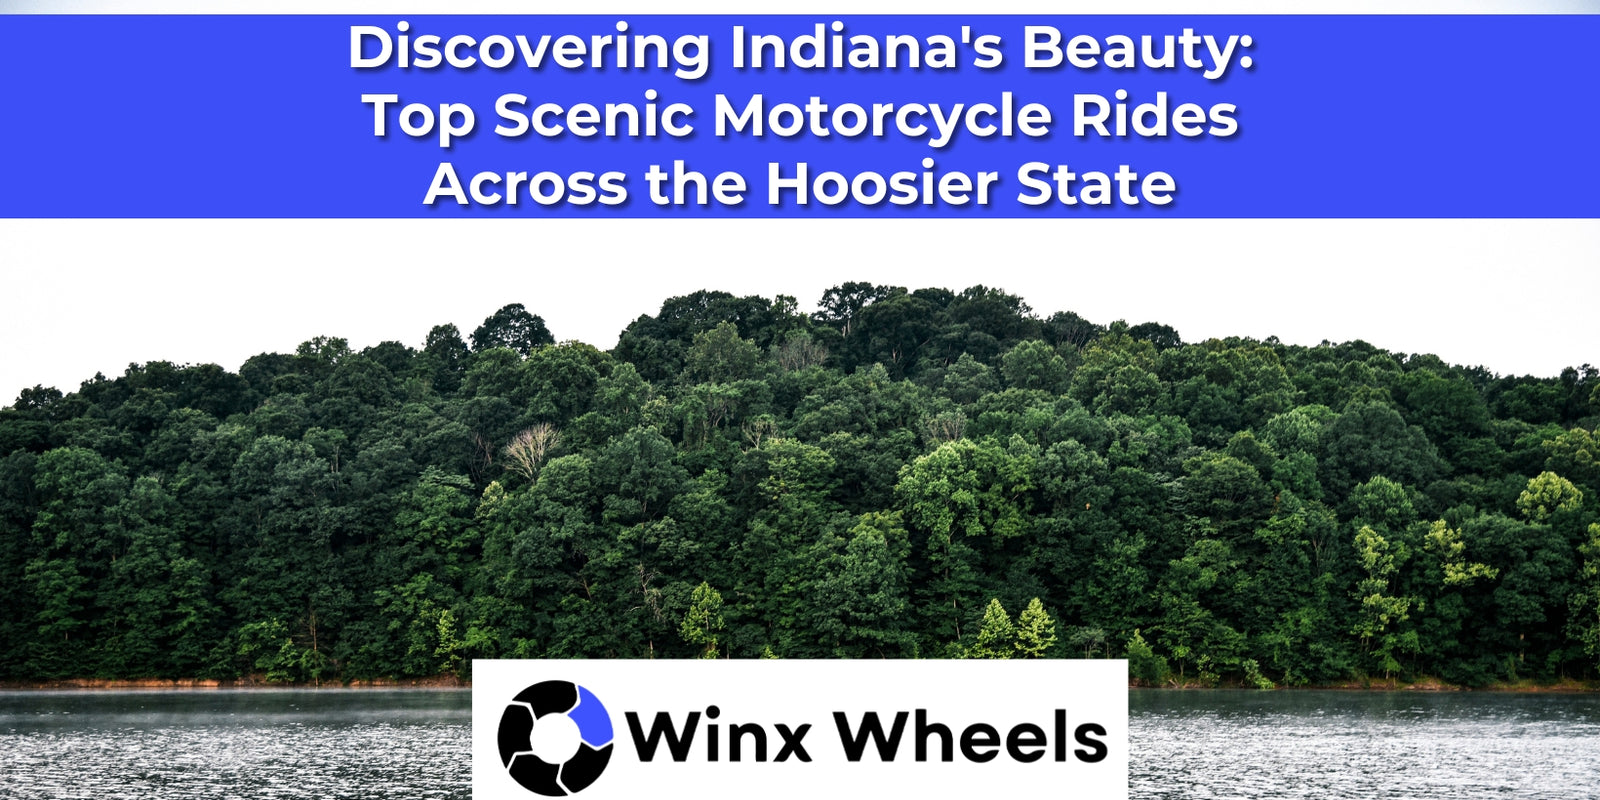 Discovering Indiana's Beauty: Top Scenic Motorcycle Rides Across the Hoosier State